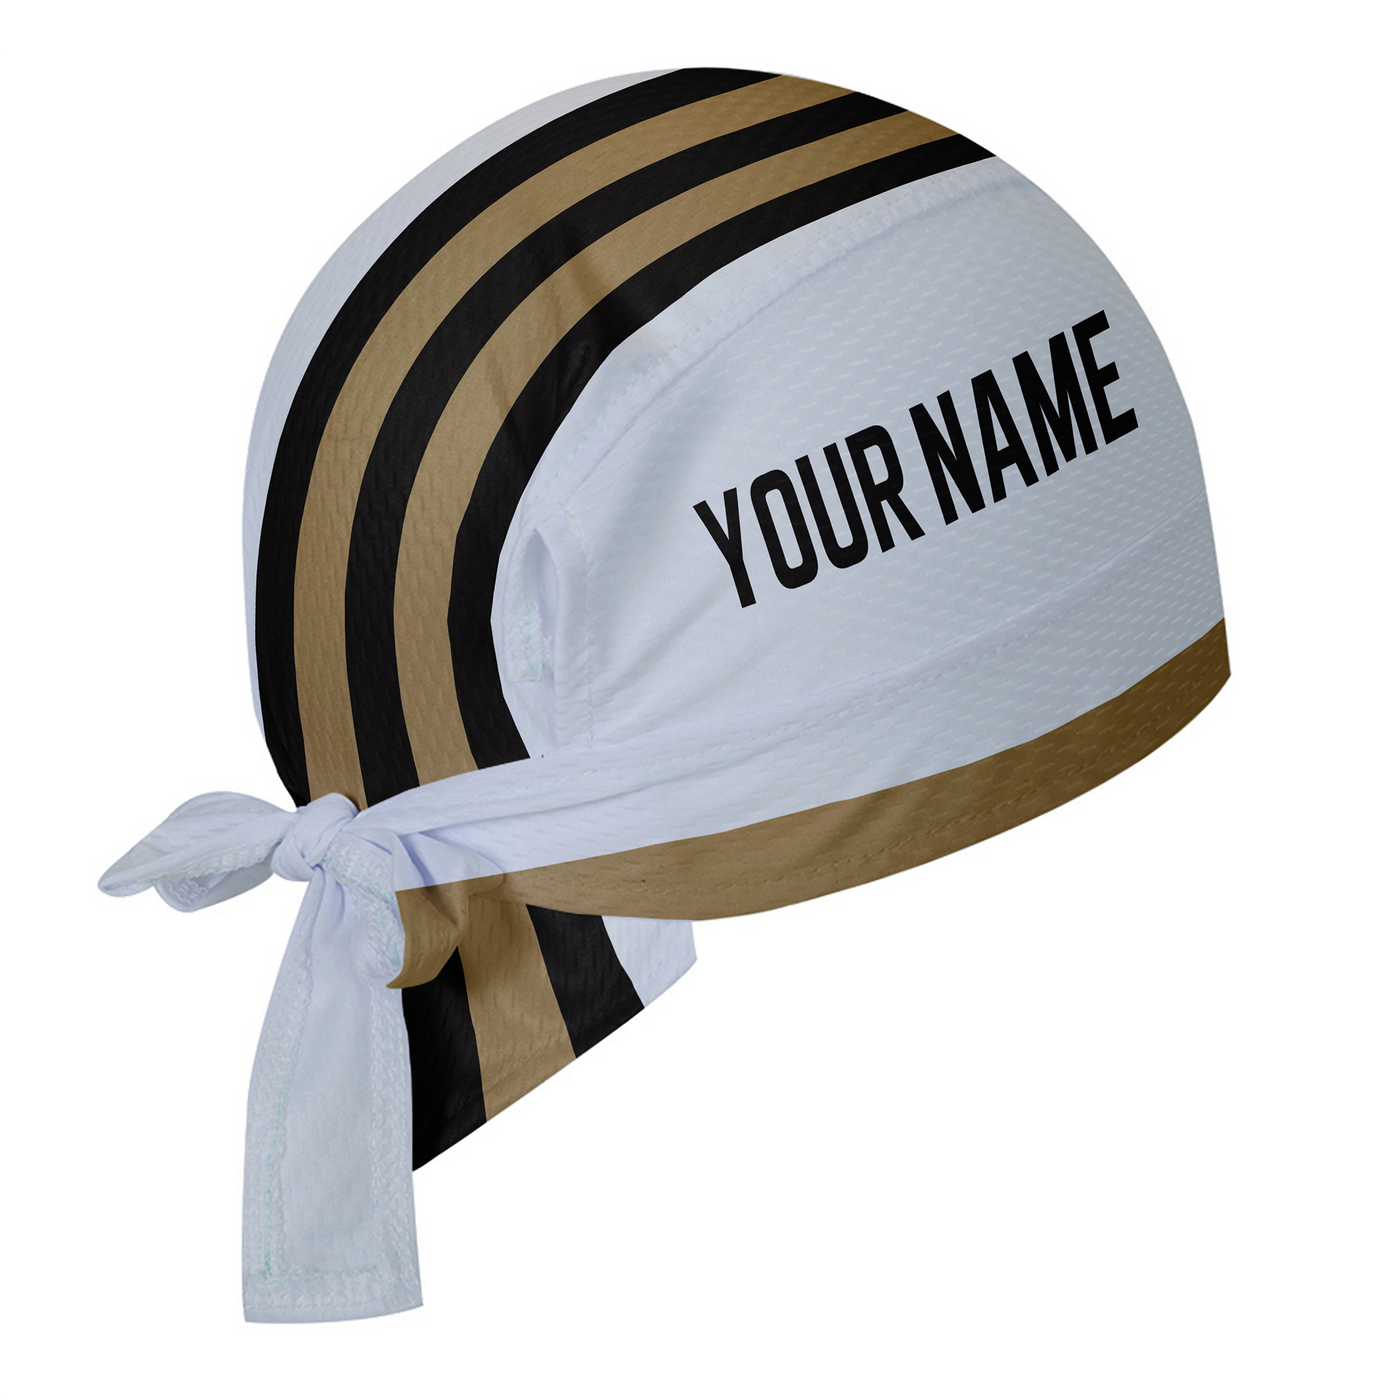 Customized New Orleans Team Cycling Scarf Sports Hats